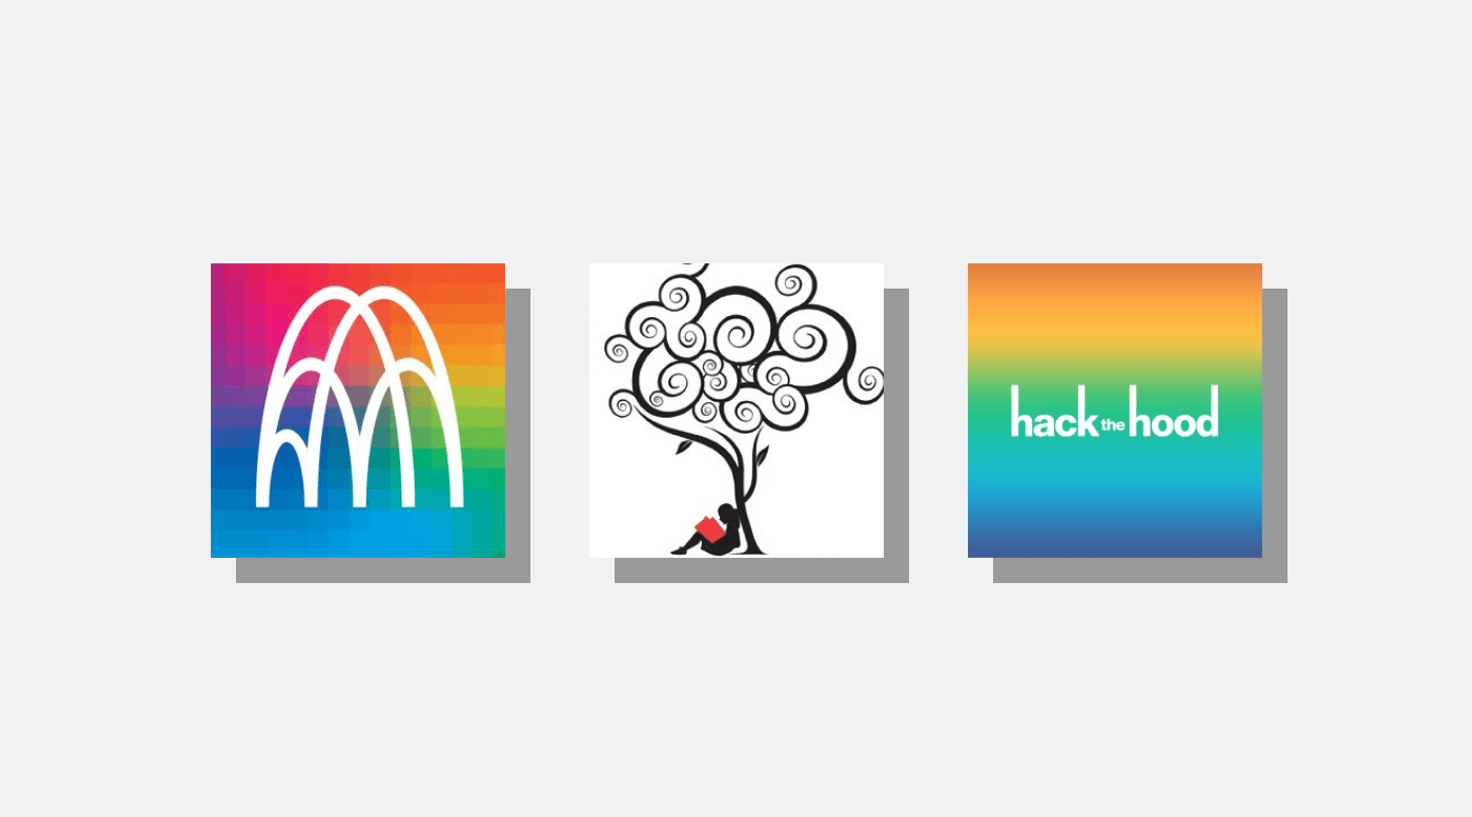 Logos of the following nonprofit organizations: Pacific Science Center, Books for Kids, and Hack the Hood